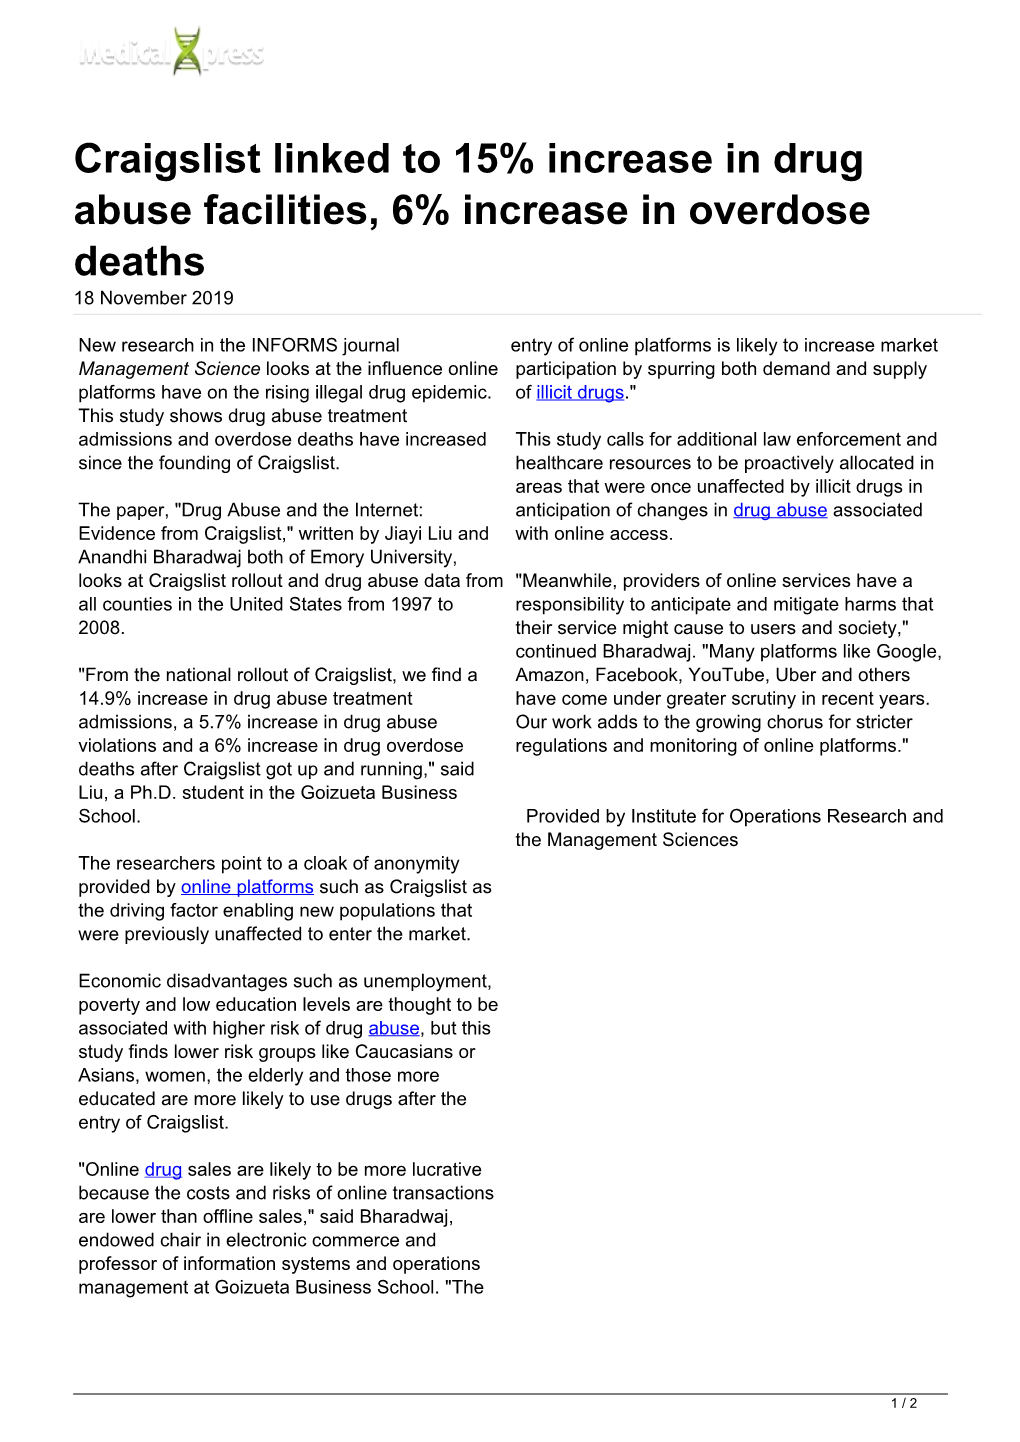 Craigslist Linked to 15% Increase in Drug Abuse Facilities, 6% Increase in Overdose Deaths 18 November 2019